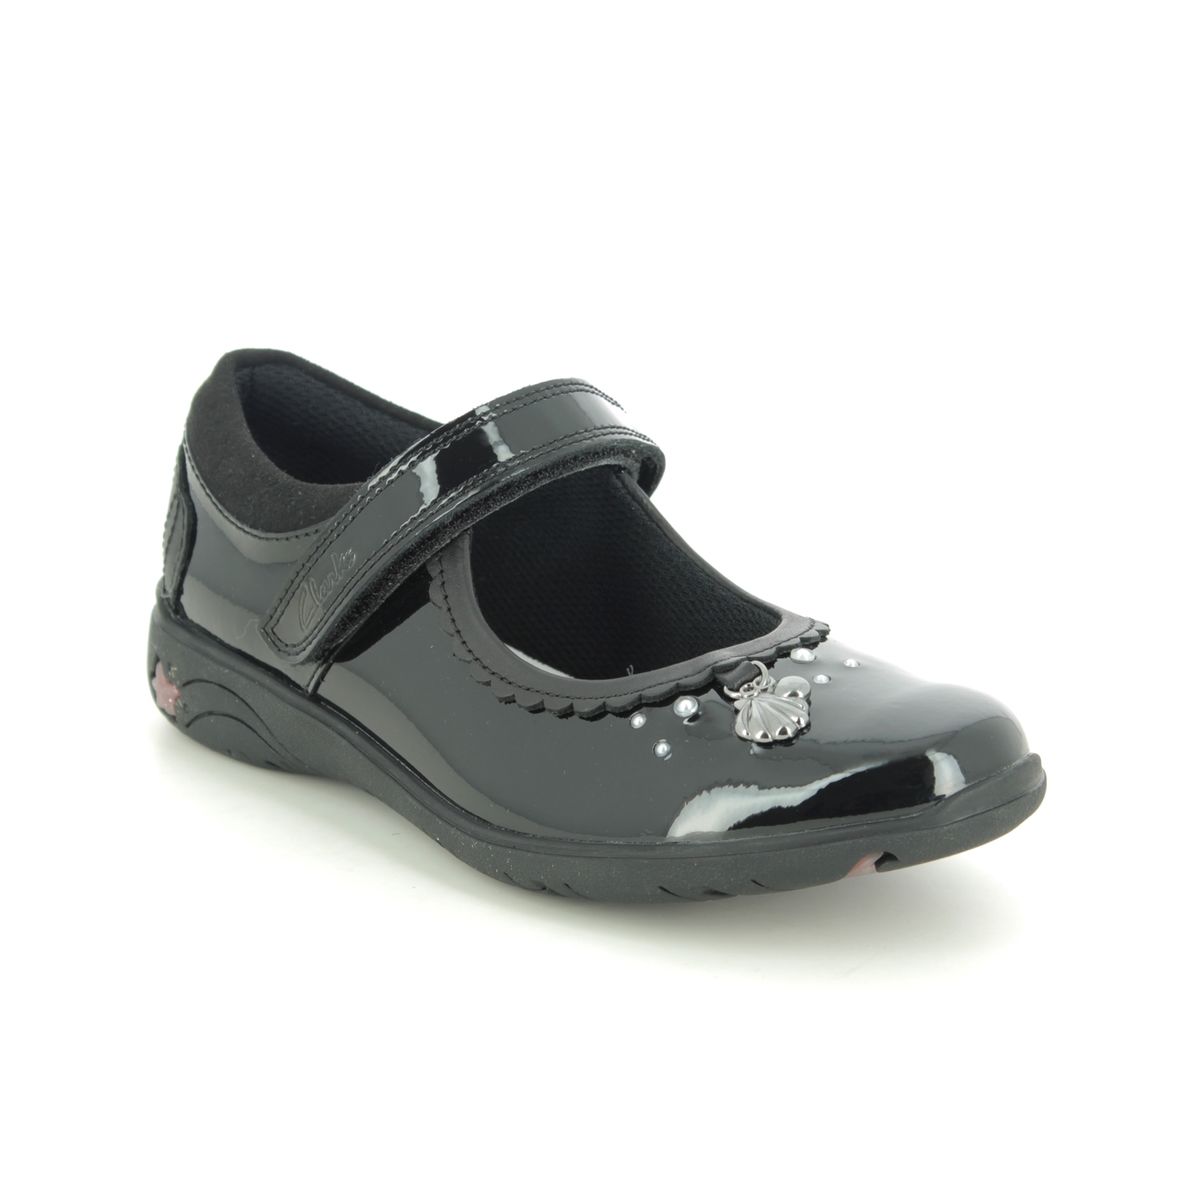 Clarks Sea Shimmer Kid Patent Shoes in Black Patent Narrow Fit Size 1½